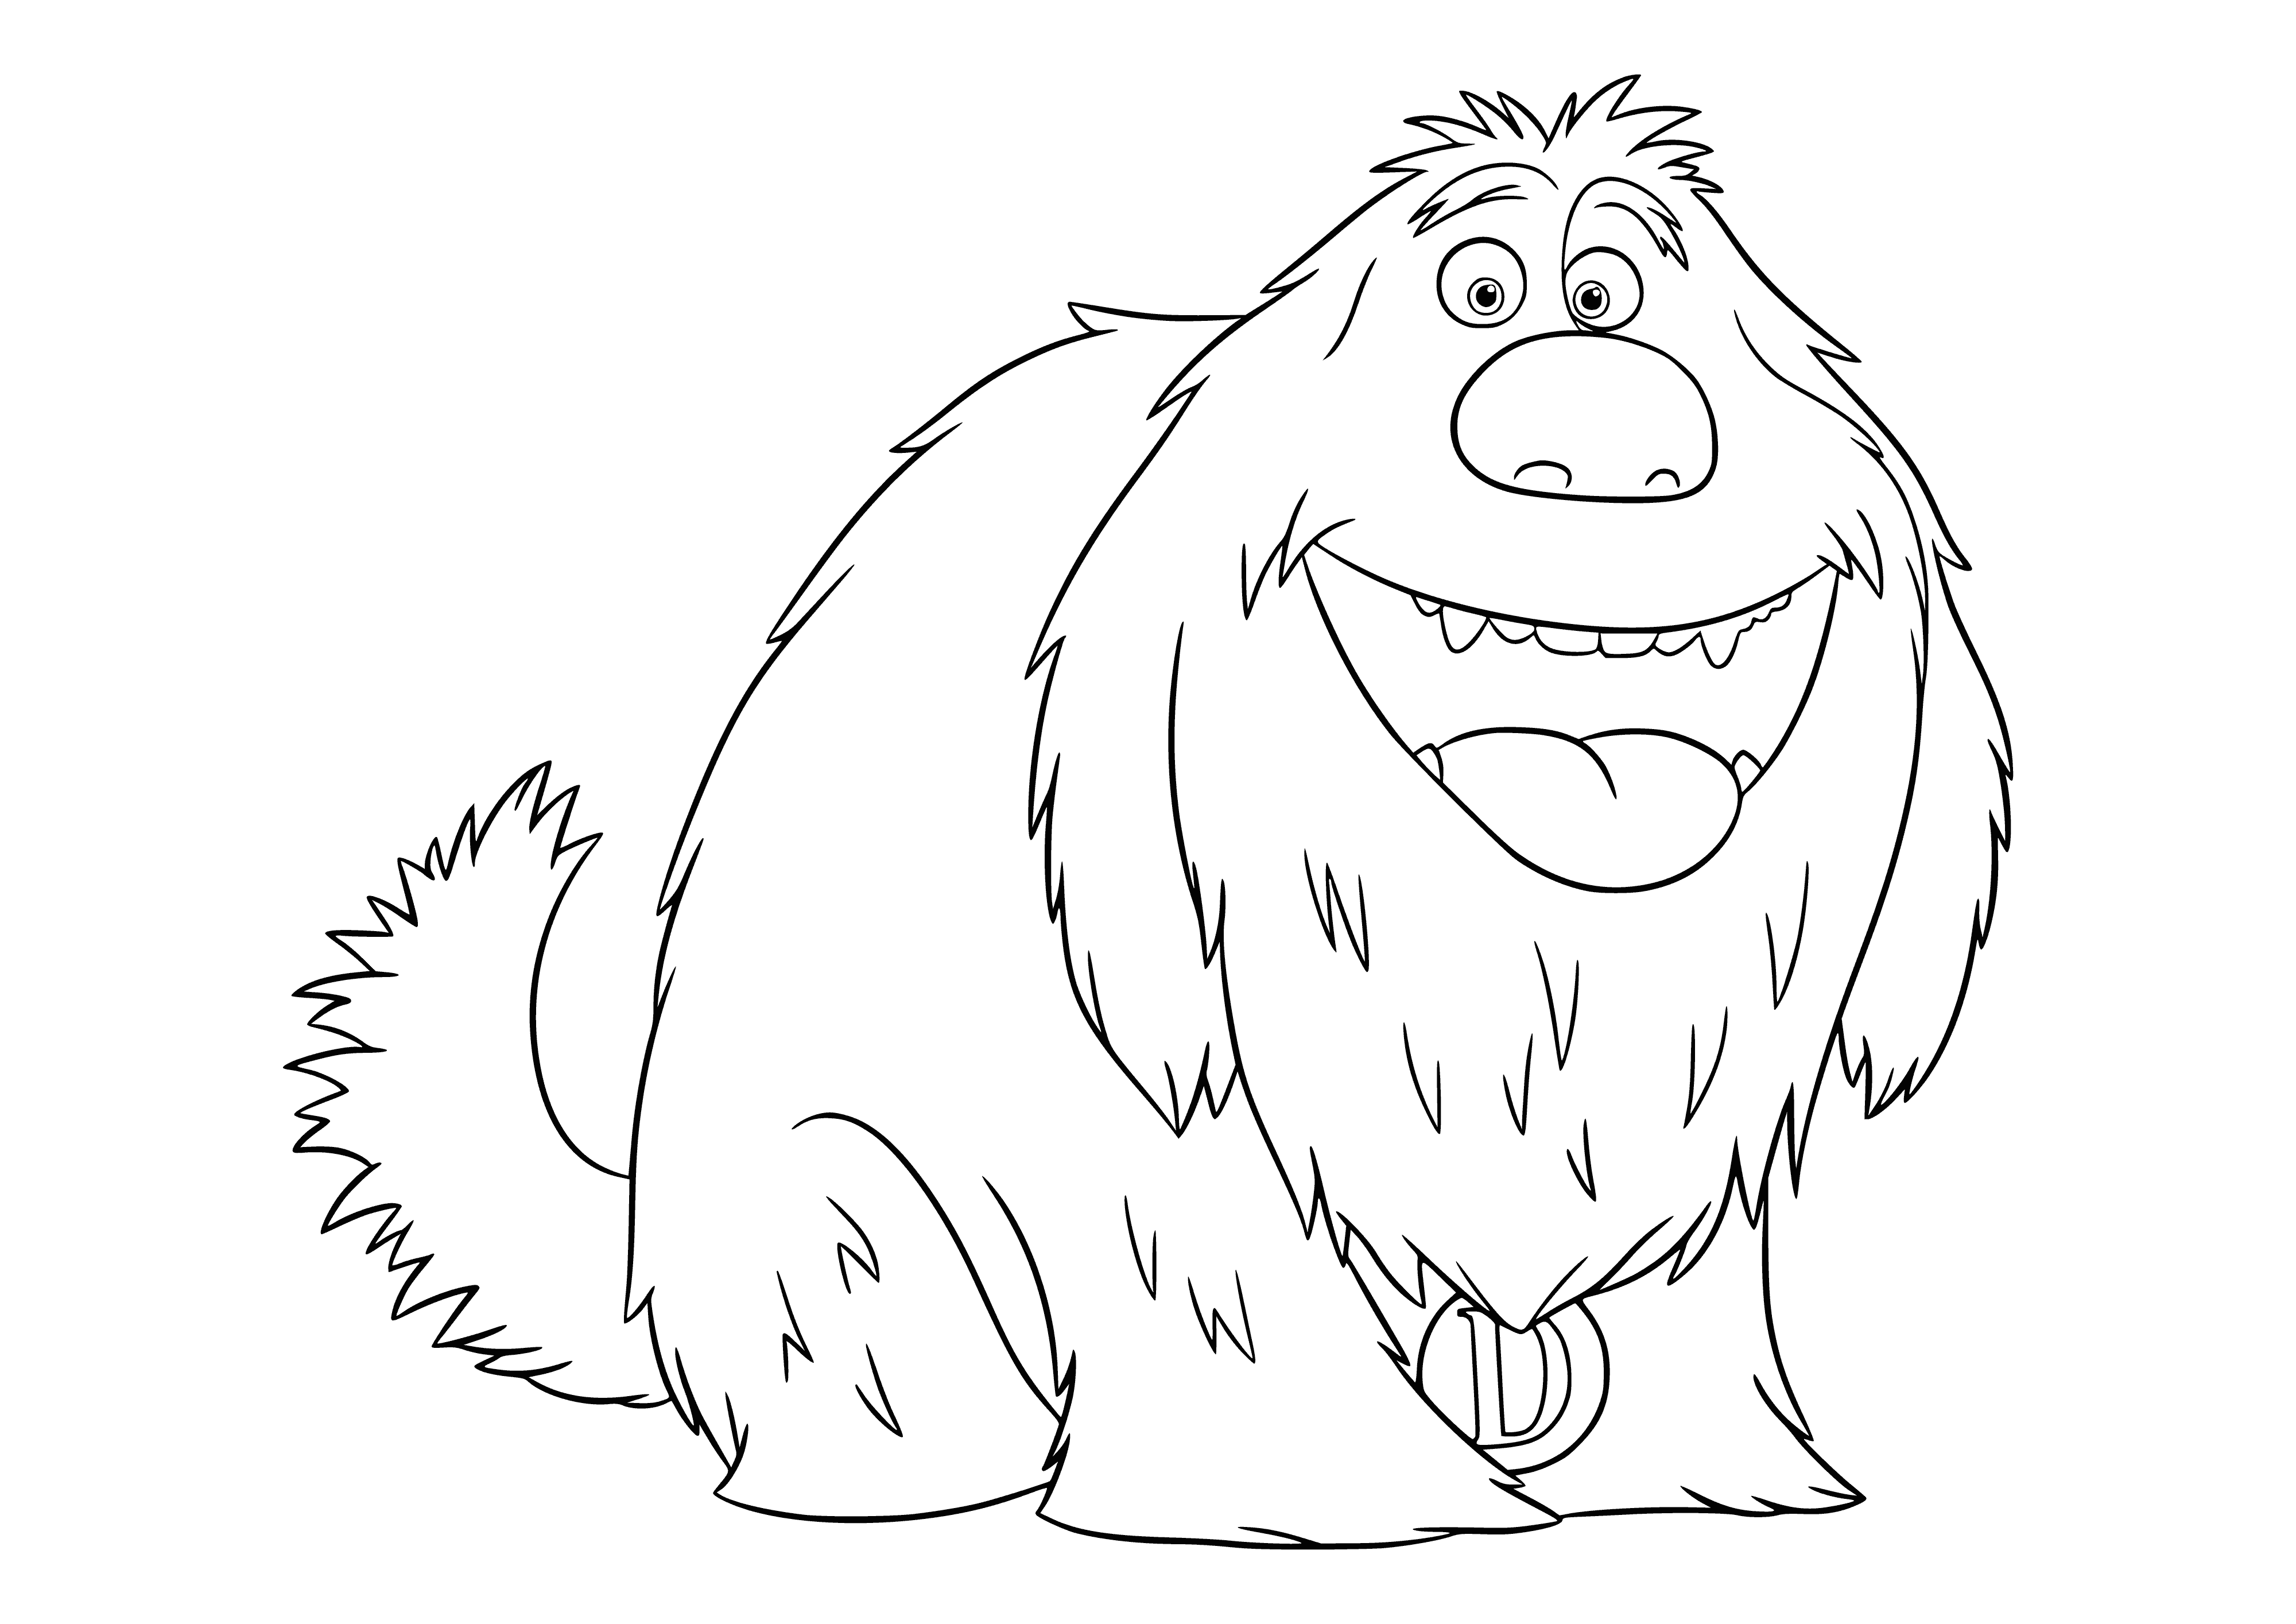 coloring page: Duke, a large, shaggy brown dog with a black nose, floppy ears, friendly demeanor, and a red collar with gold tag.